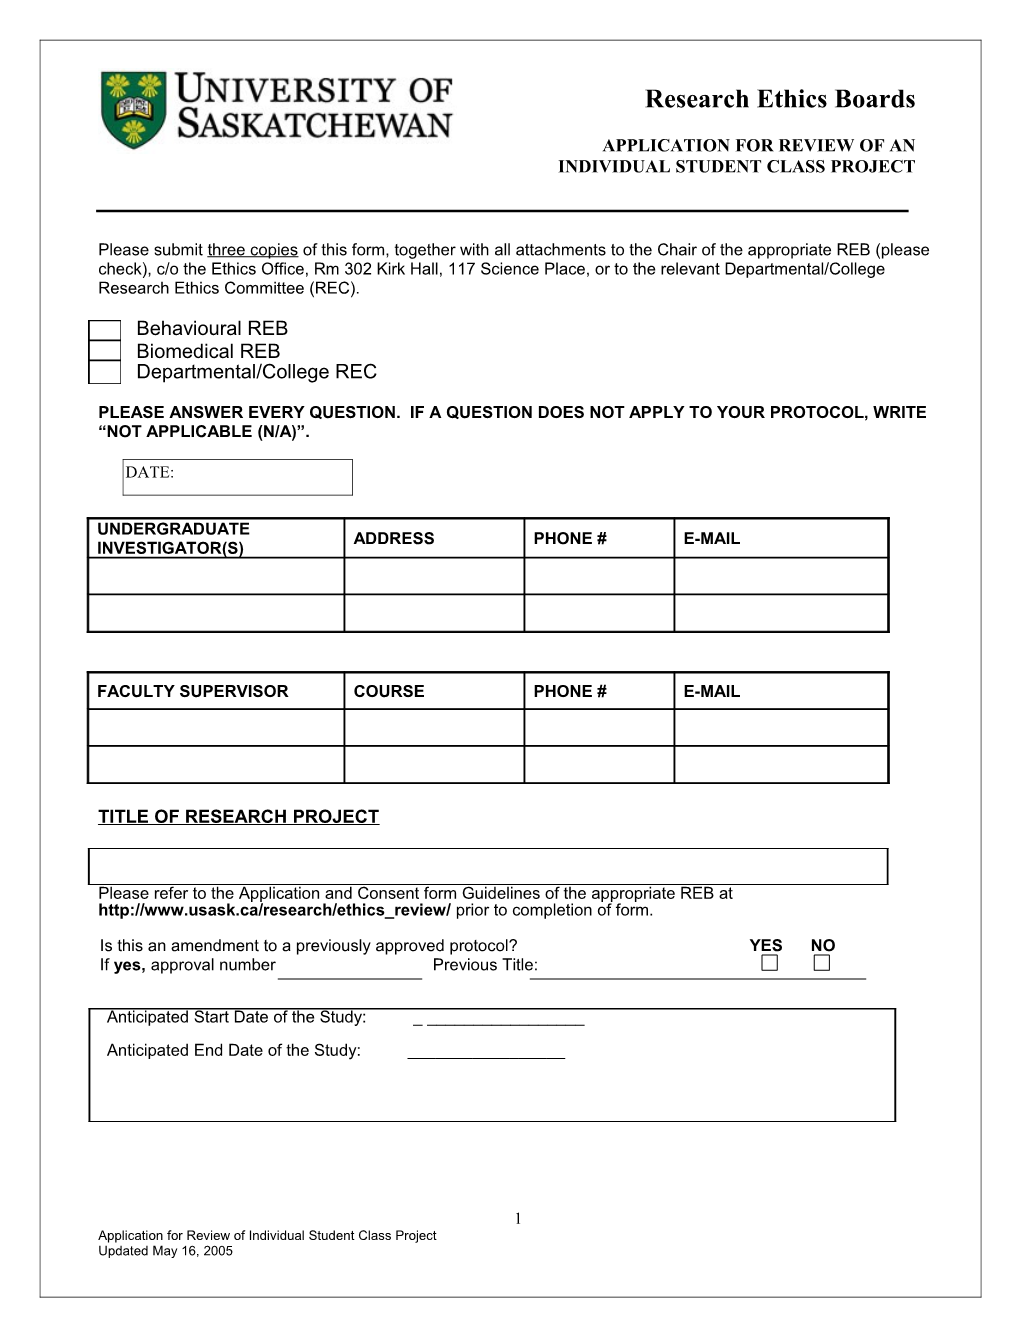 Please Submit Three Copies of This Form, Together with All Attachments to the Chair Of